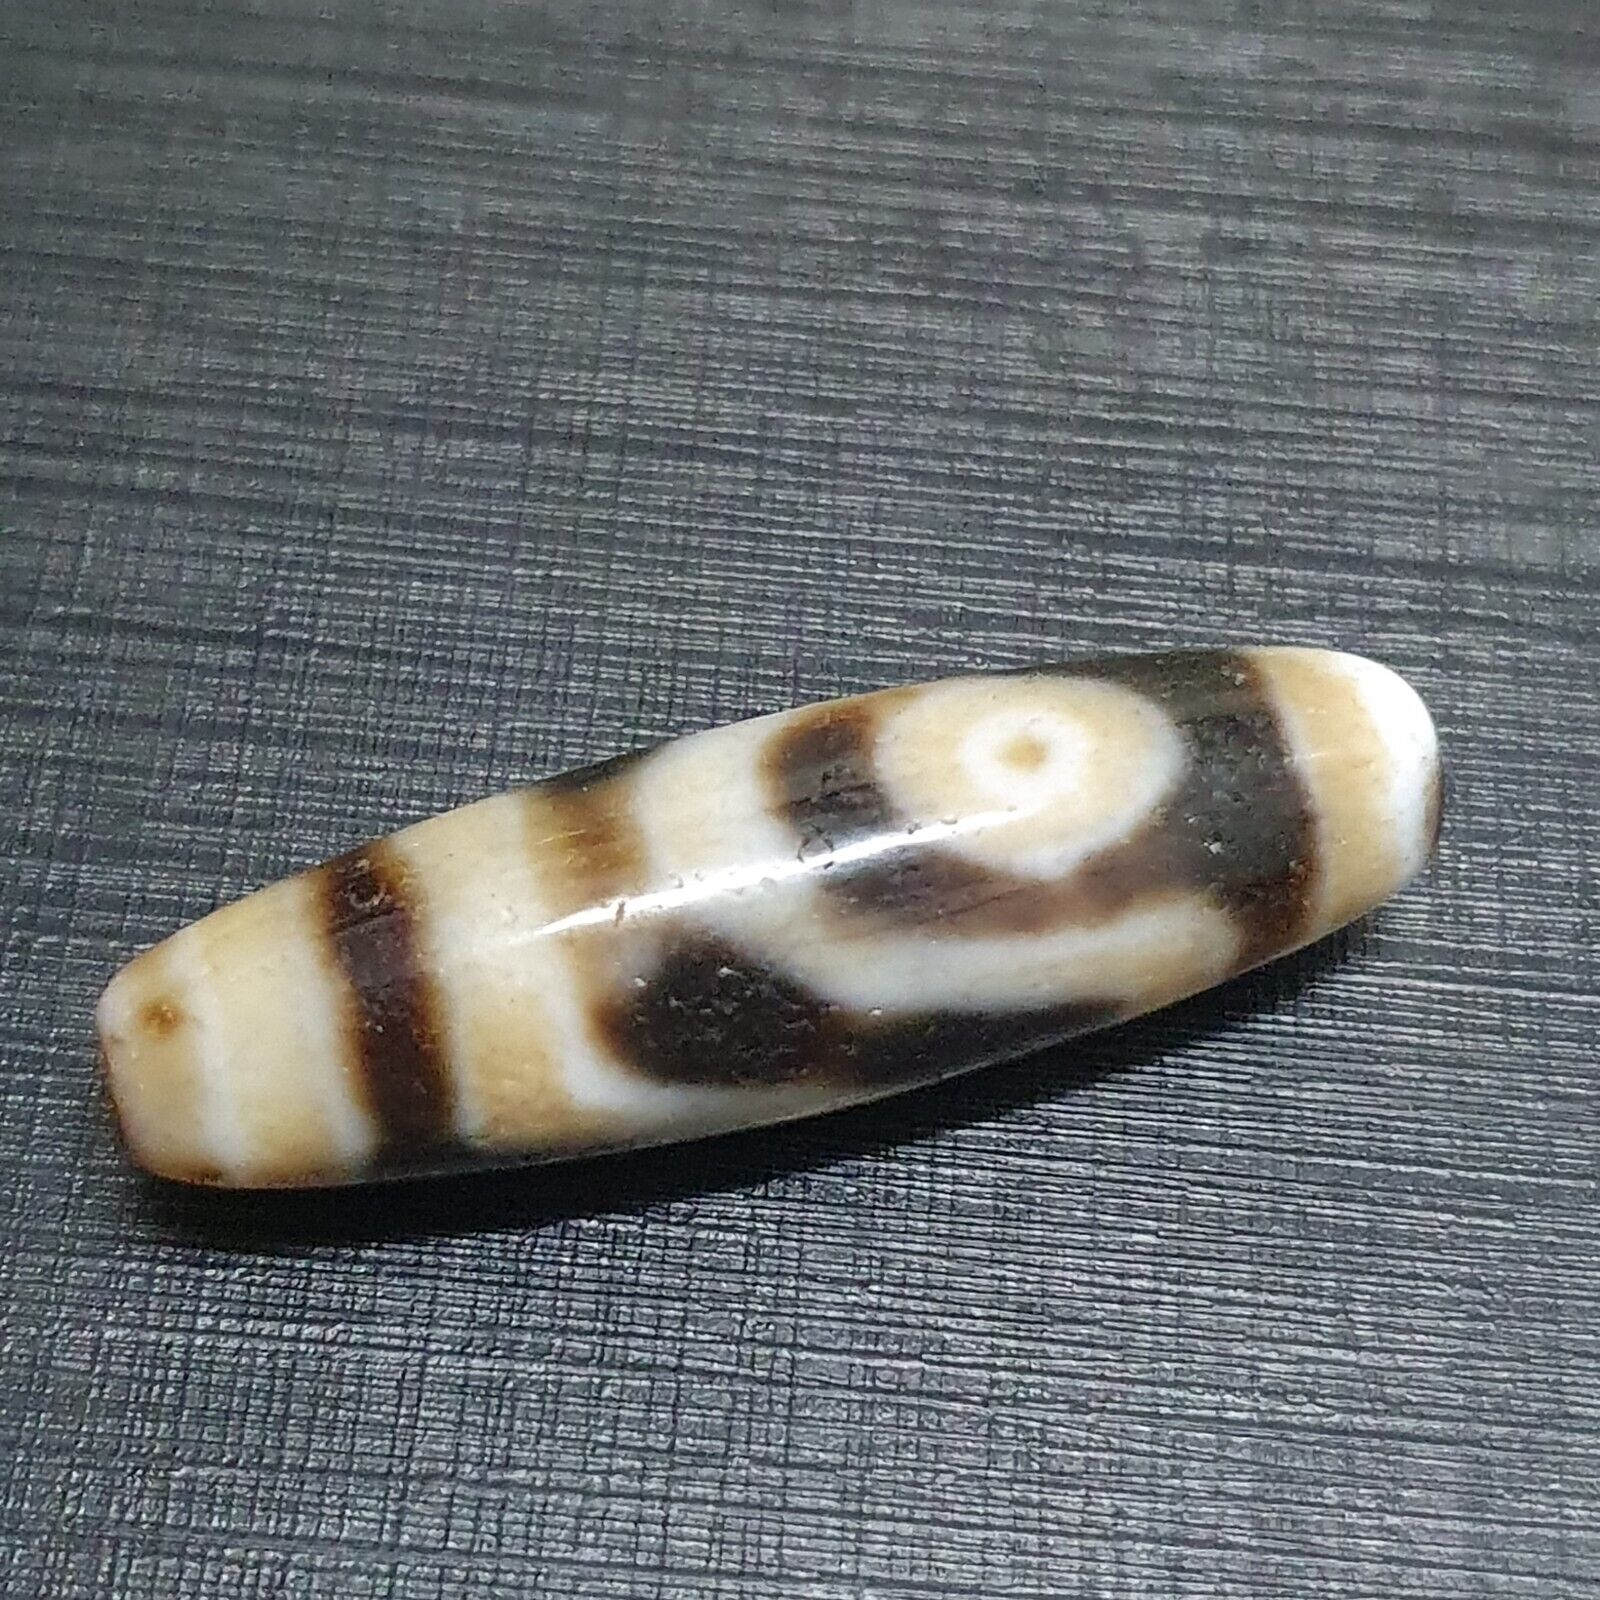 "Two antique Himalayan Indo-Tibetan Agate Dzi beads, featuring a unique 'slide eyes' pattern, highly valued for their spiritual significance and cultural heritage. These rare beads showcase an intricate design, believed to bring good fortune, protection, and blessings to the wearer. The distinctive pattern and craftsmanship make each bead a unique piece of art, originating from the Himalayan region."